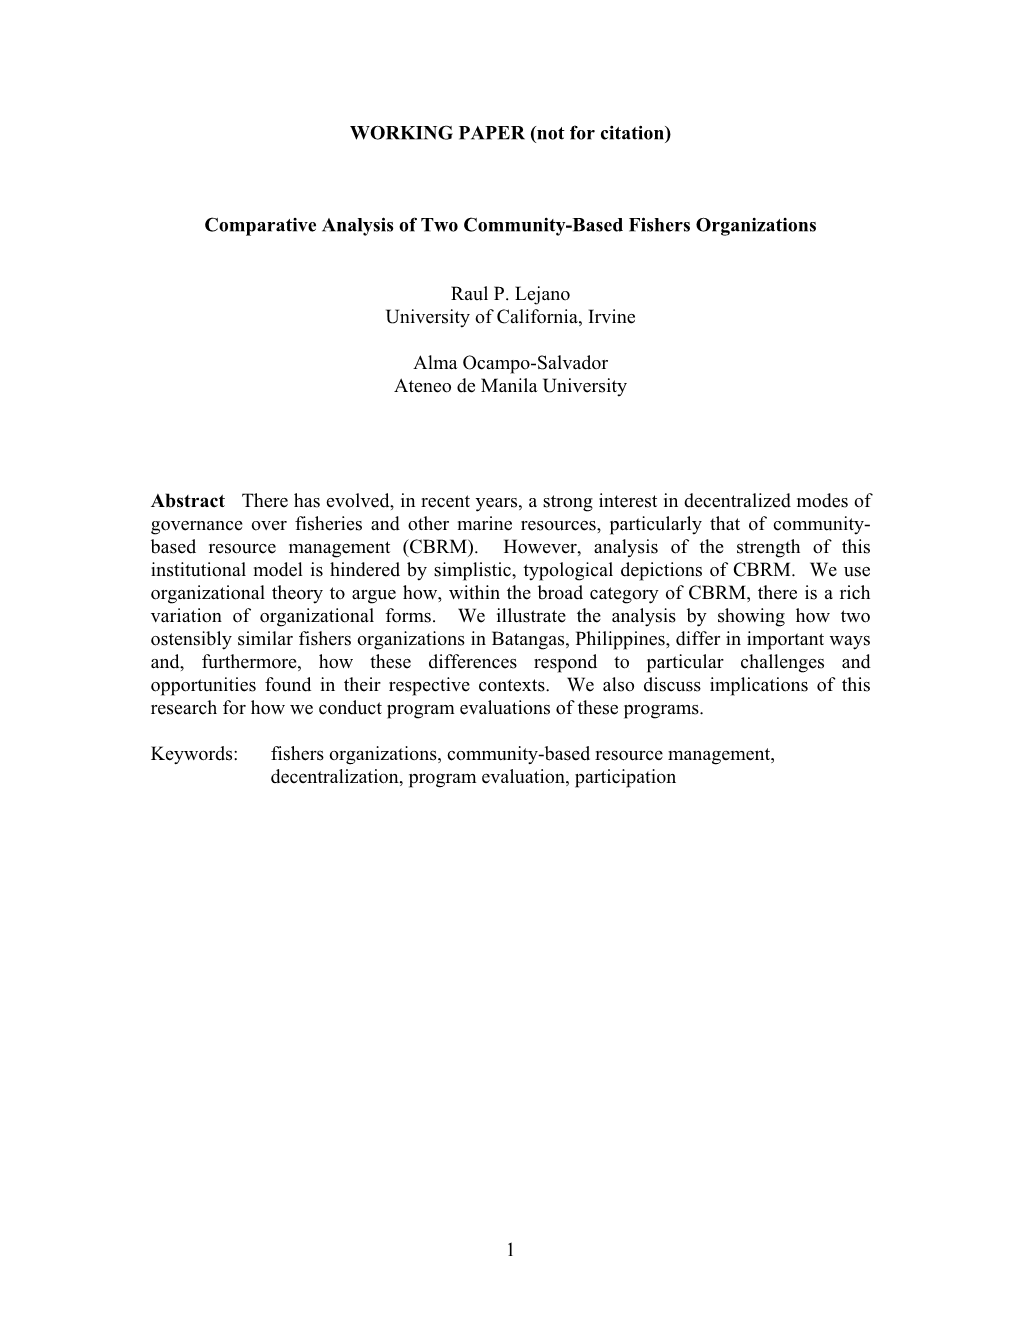 Comparative Analysis of Two Community-Based Fishers Organizations